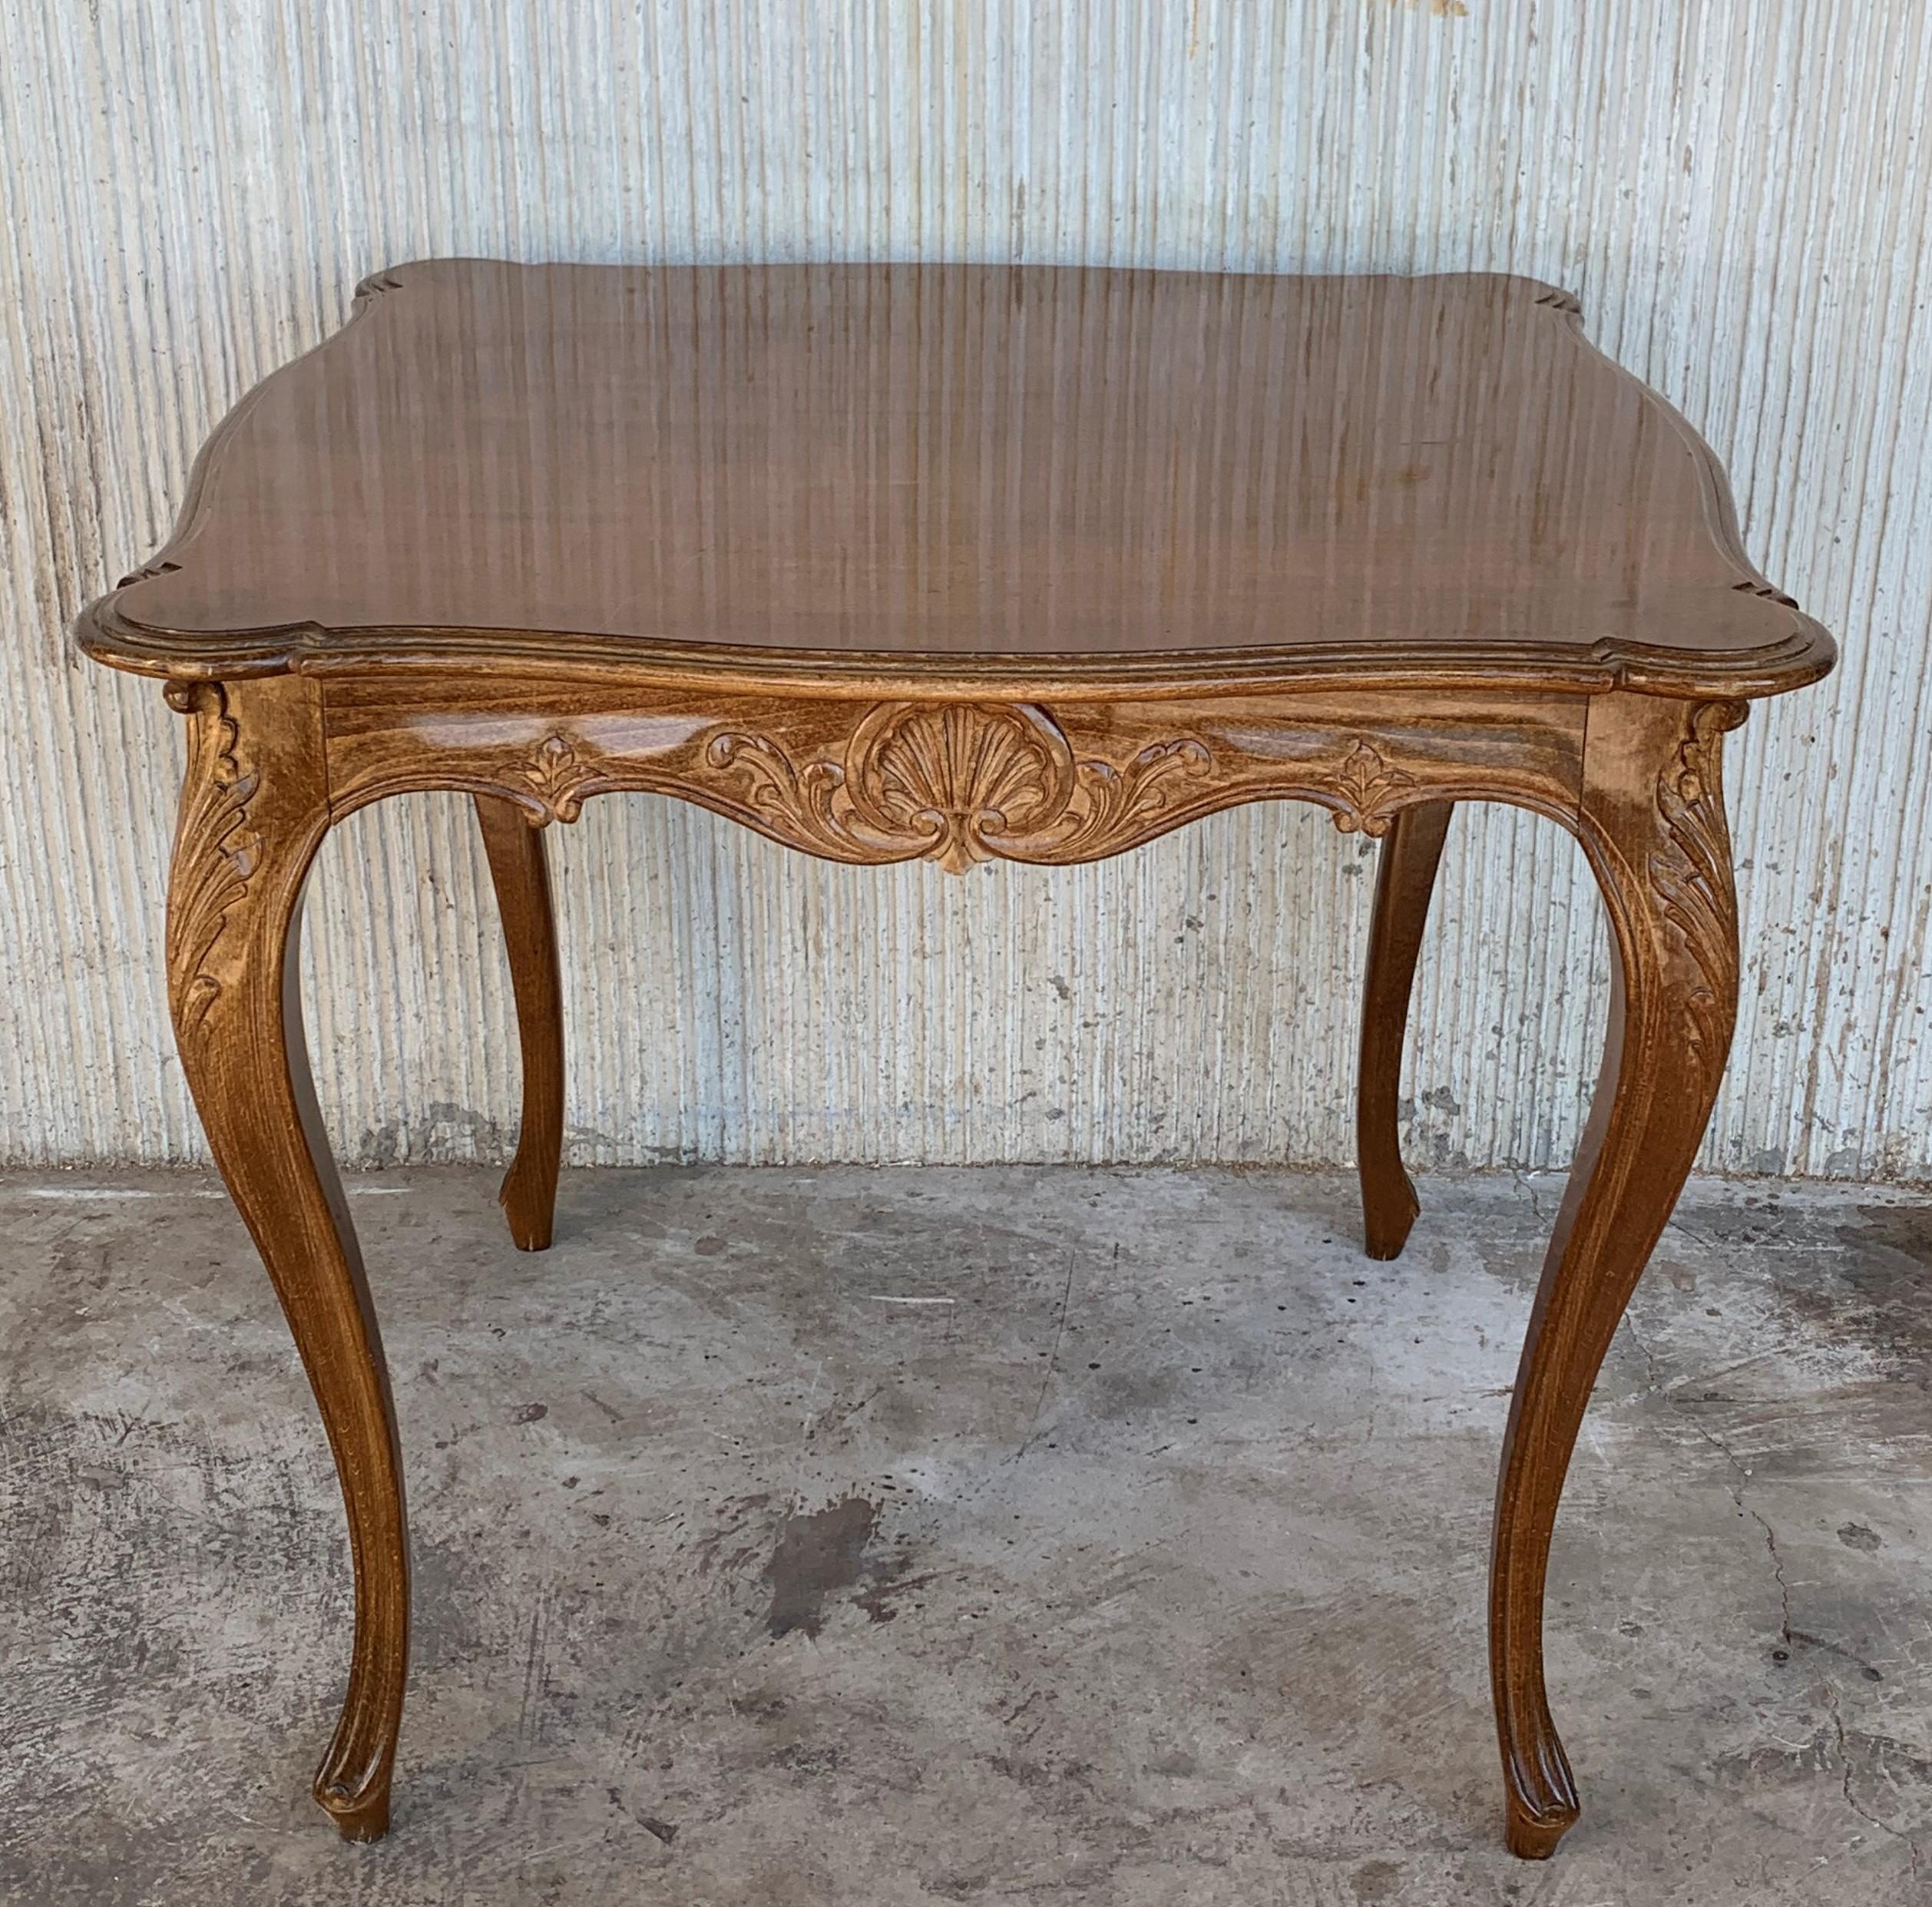 A beautifully carved French Louis XV or Rococo style walnut card table which can either be used as a center table, seats 4 people for games or card play. The table is raised on four carved cabriole legs and has a large drawer.